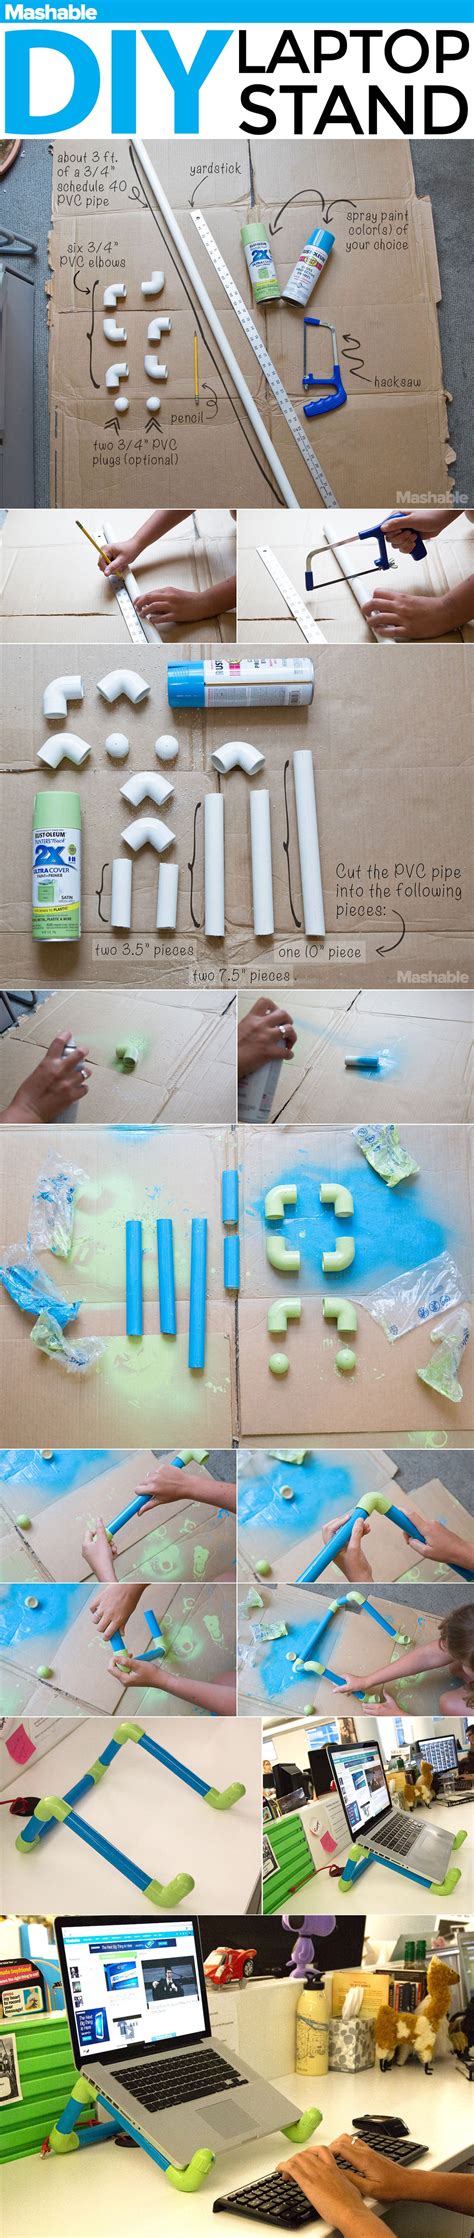 awesome diy pvc pipe crafts    top reveal